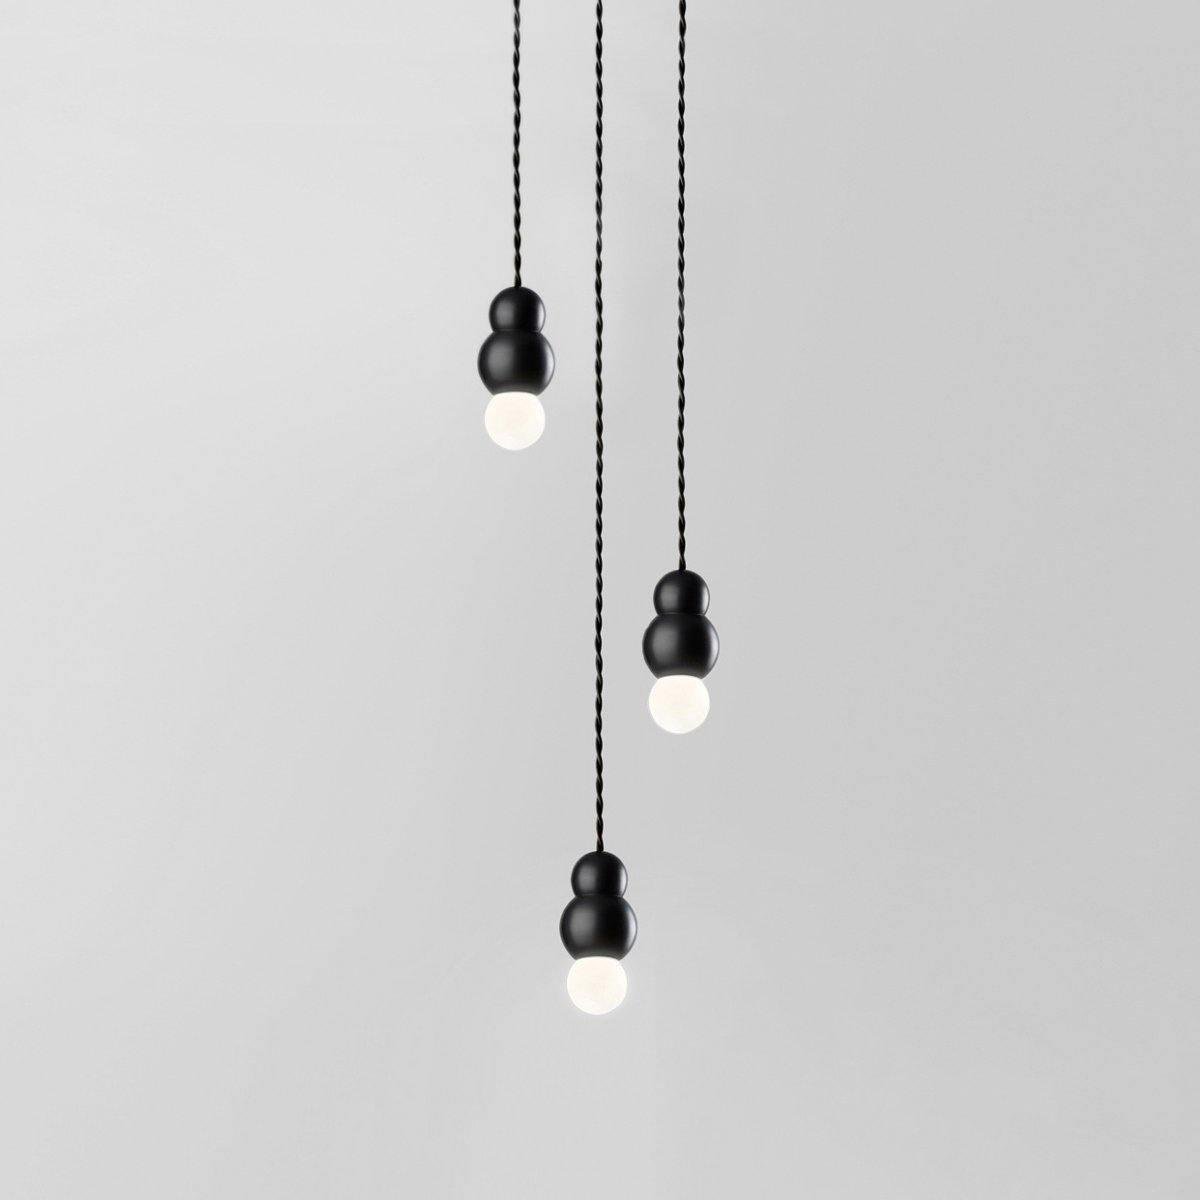 Black Ball Light Pendant Series 3heads with a diameter of 3.9 inches and a height of 6.81 inches (10cm x 17.3cm), featuring a flexible design.